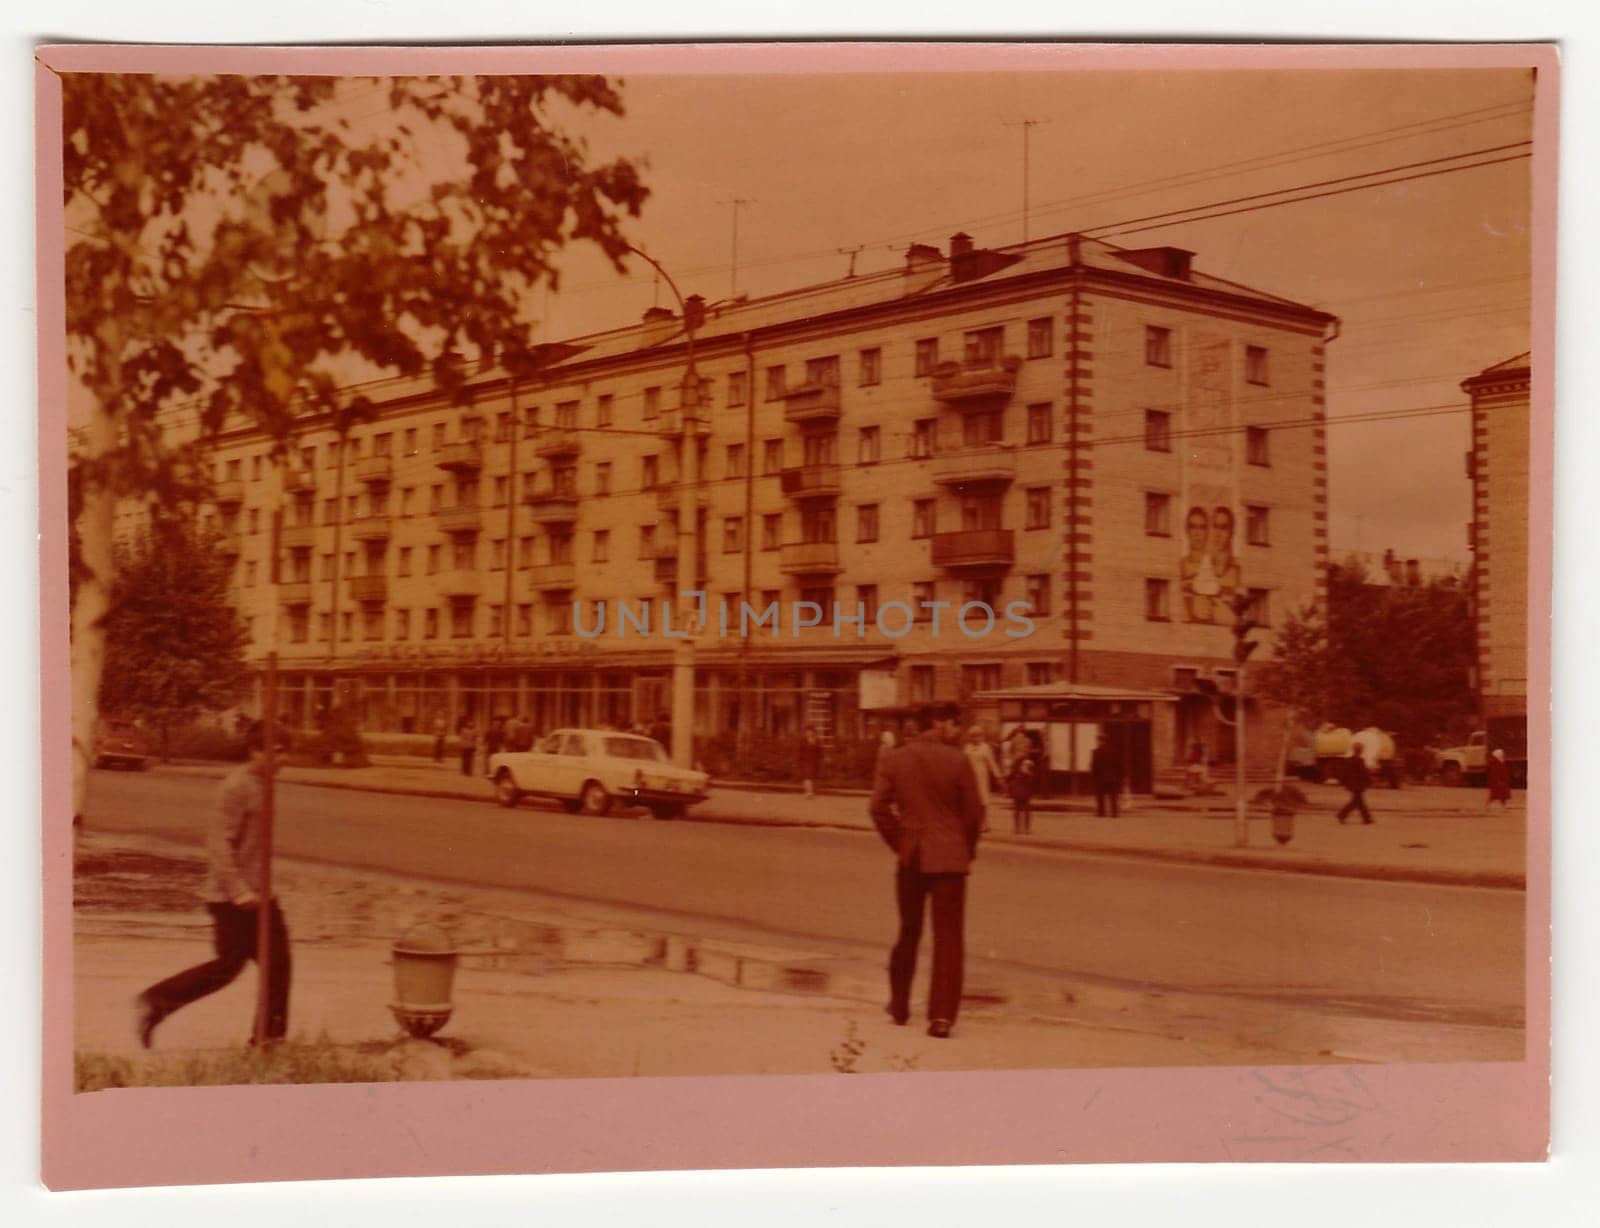 USSR - CIRCA 1970s: Vintage photo shows street in USSR.